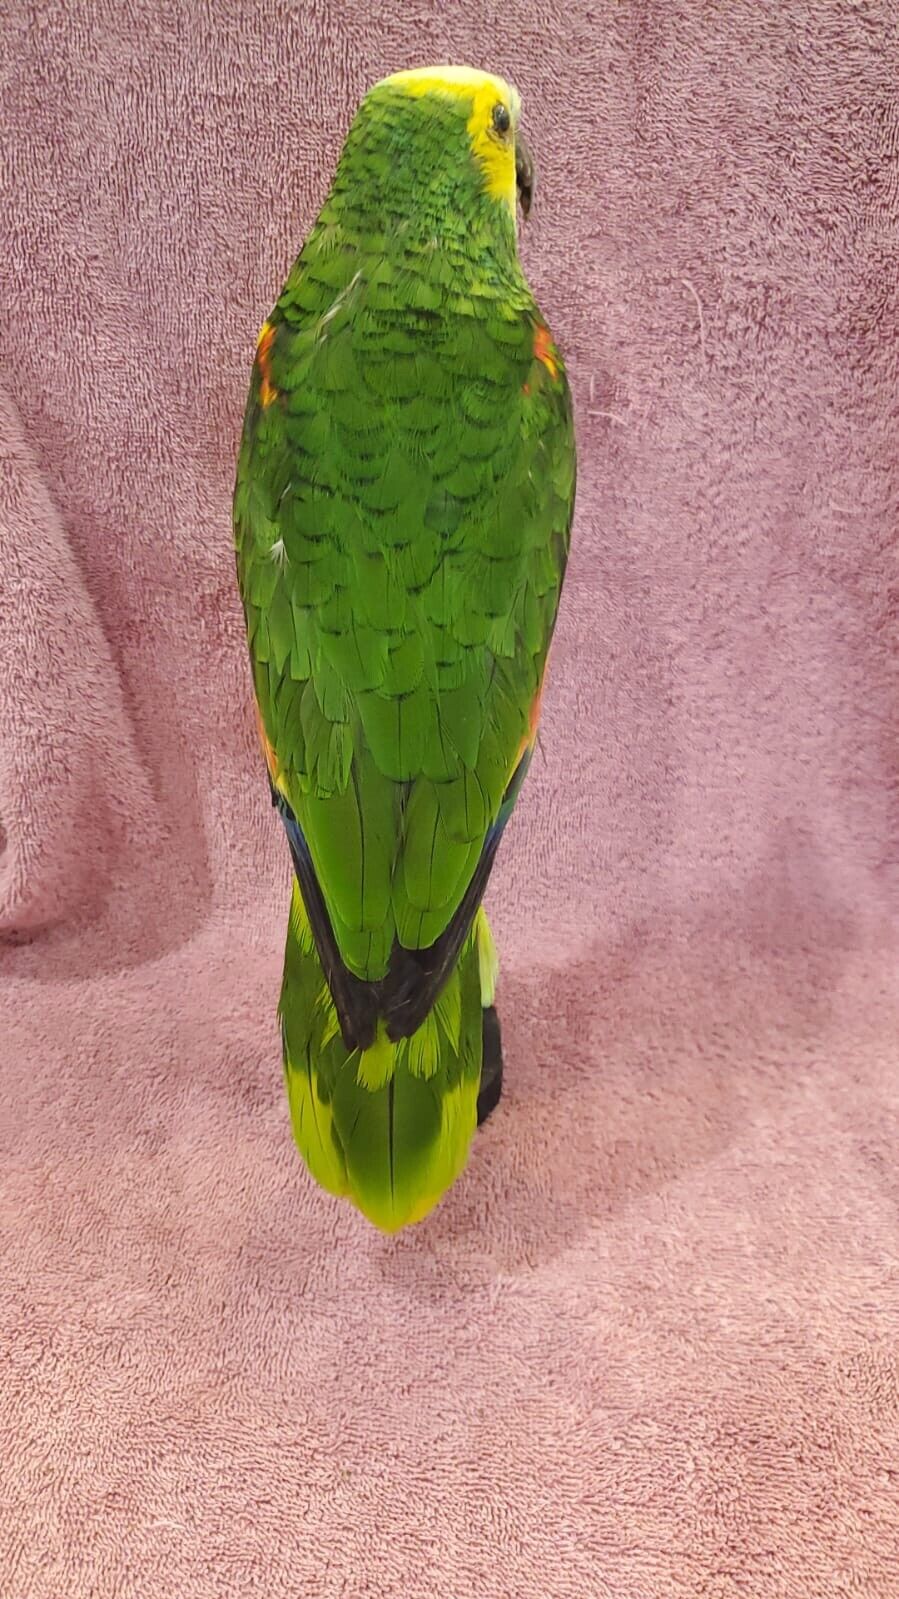 Turquoise Fronted Amazon Parrot Taxidermy Mount